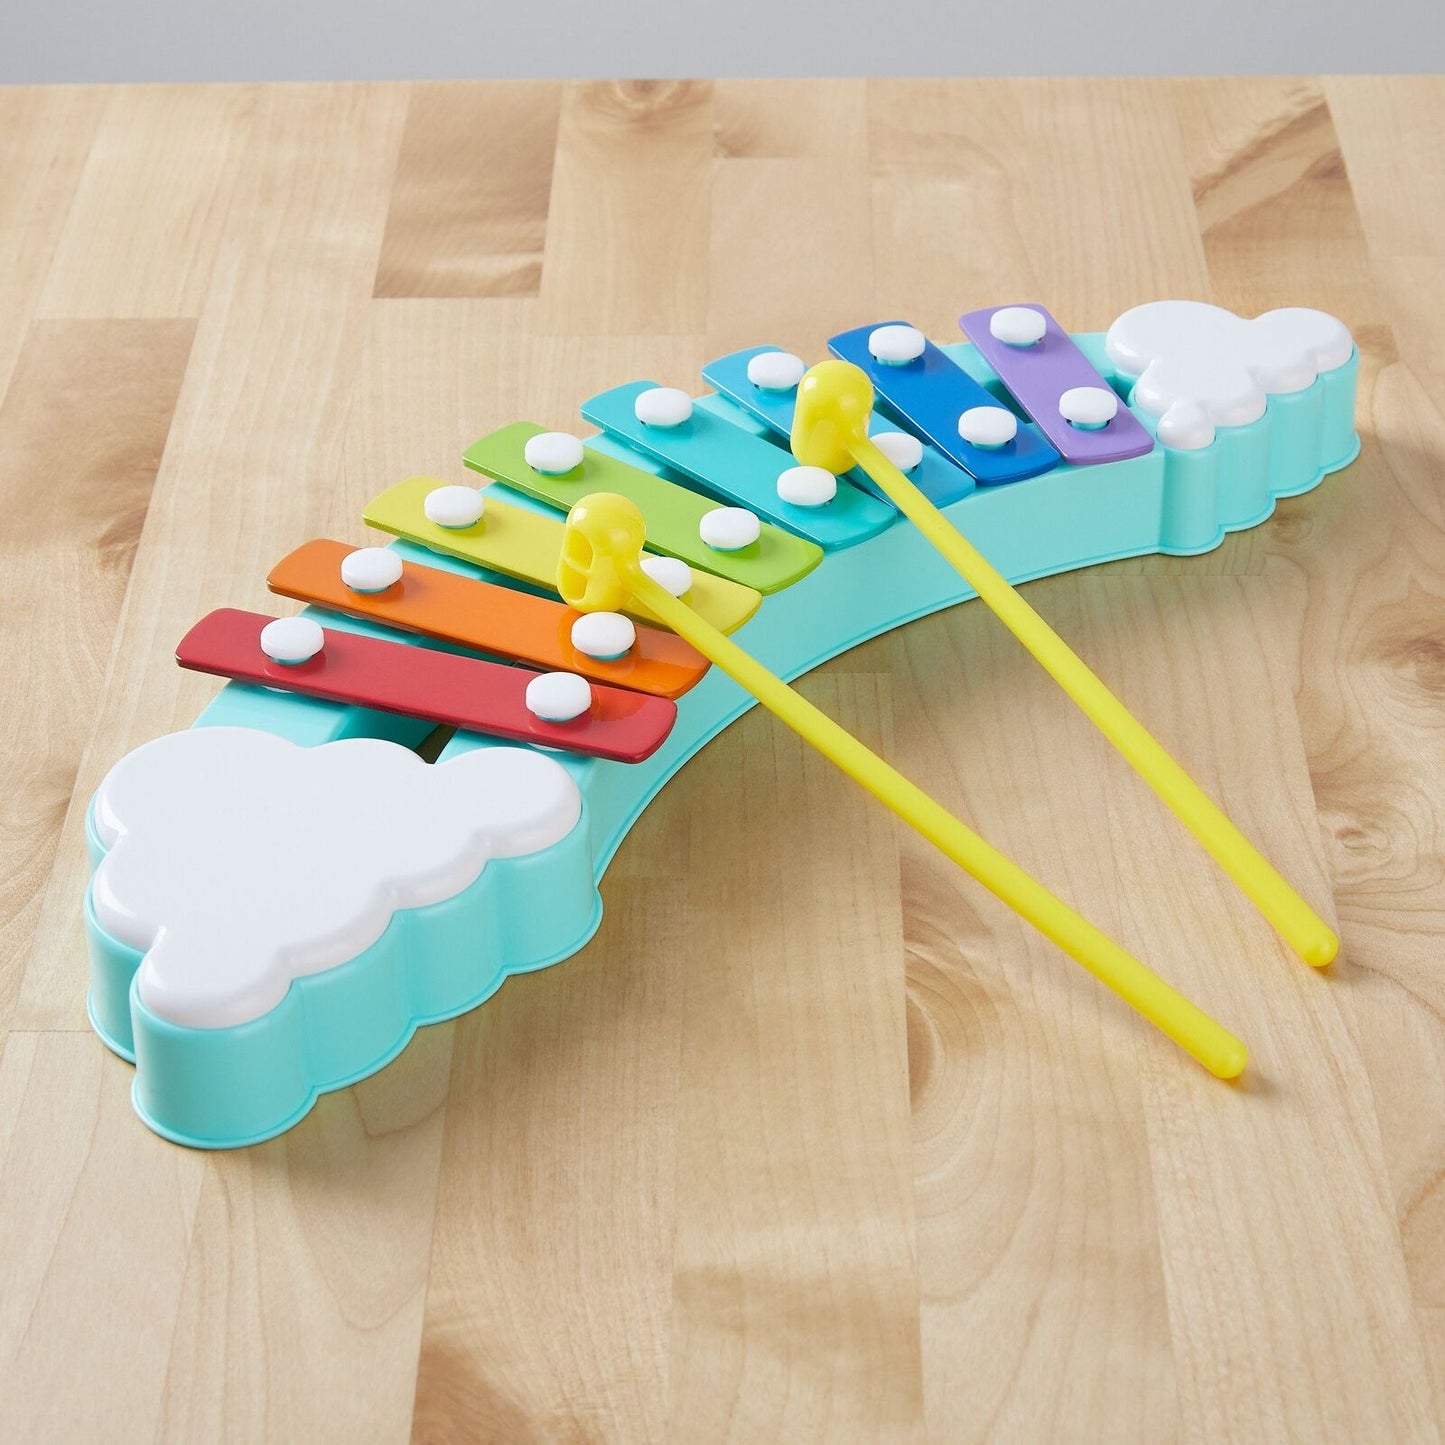 Xylophone Musical Toy Product Image 1